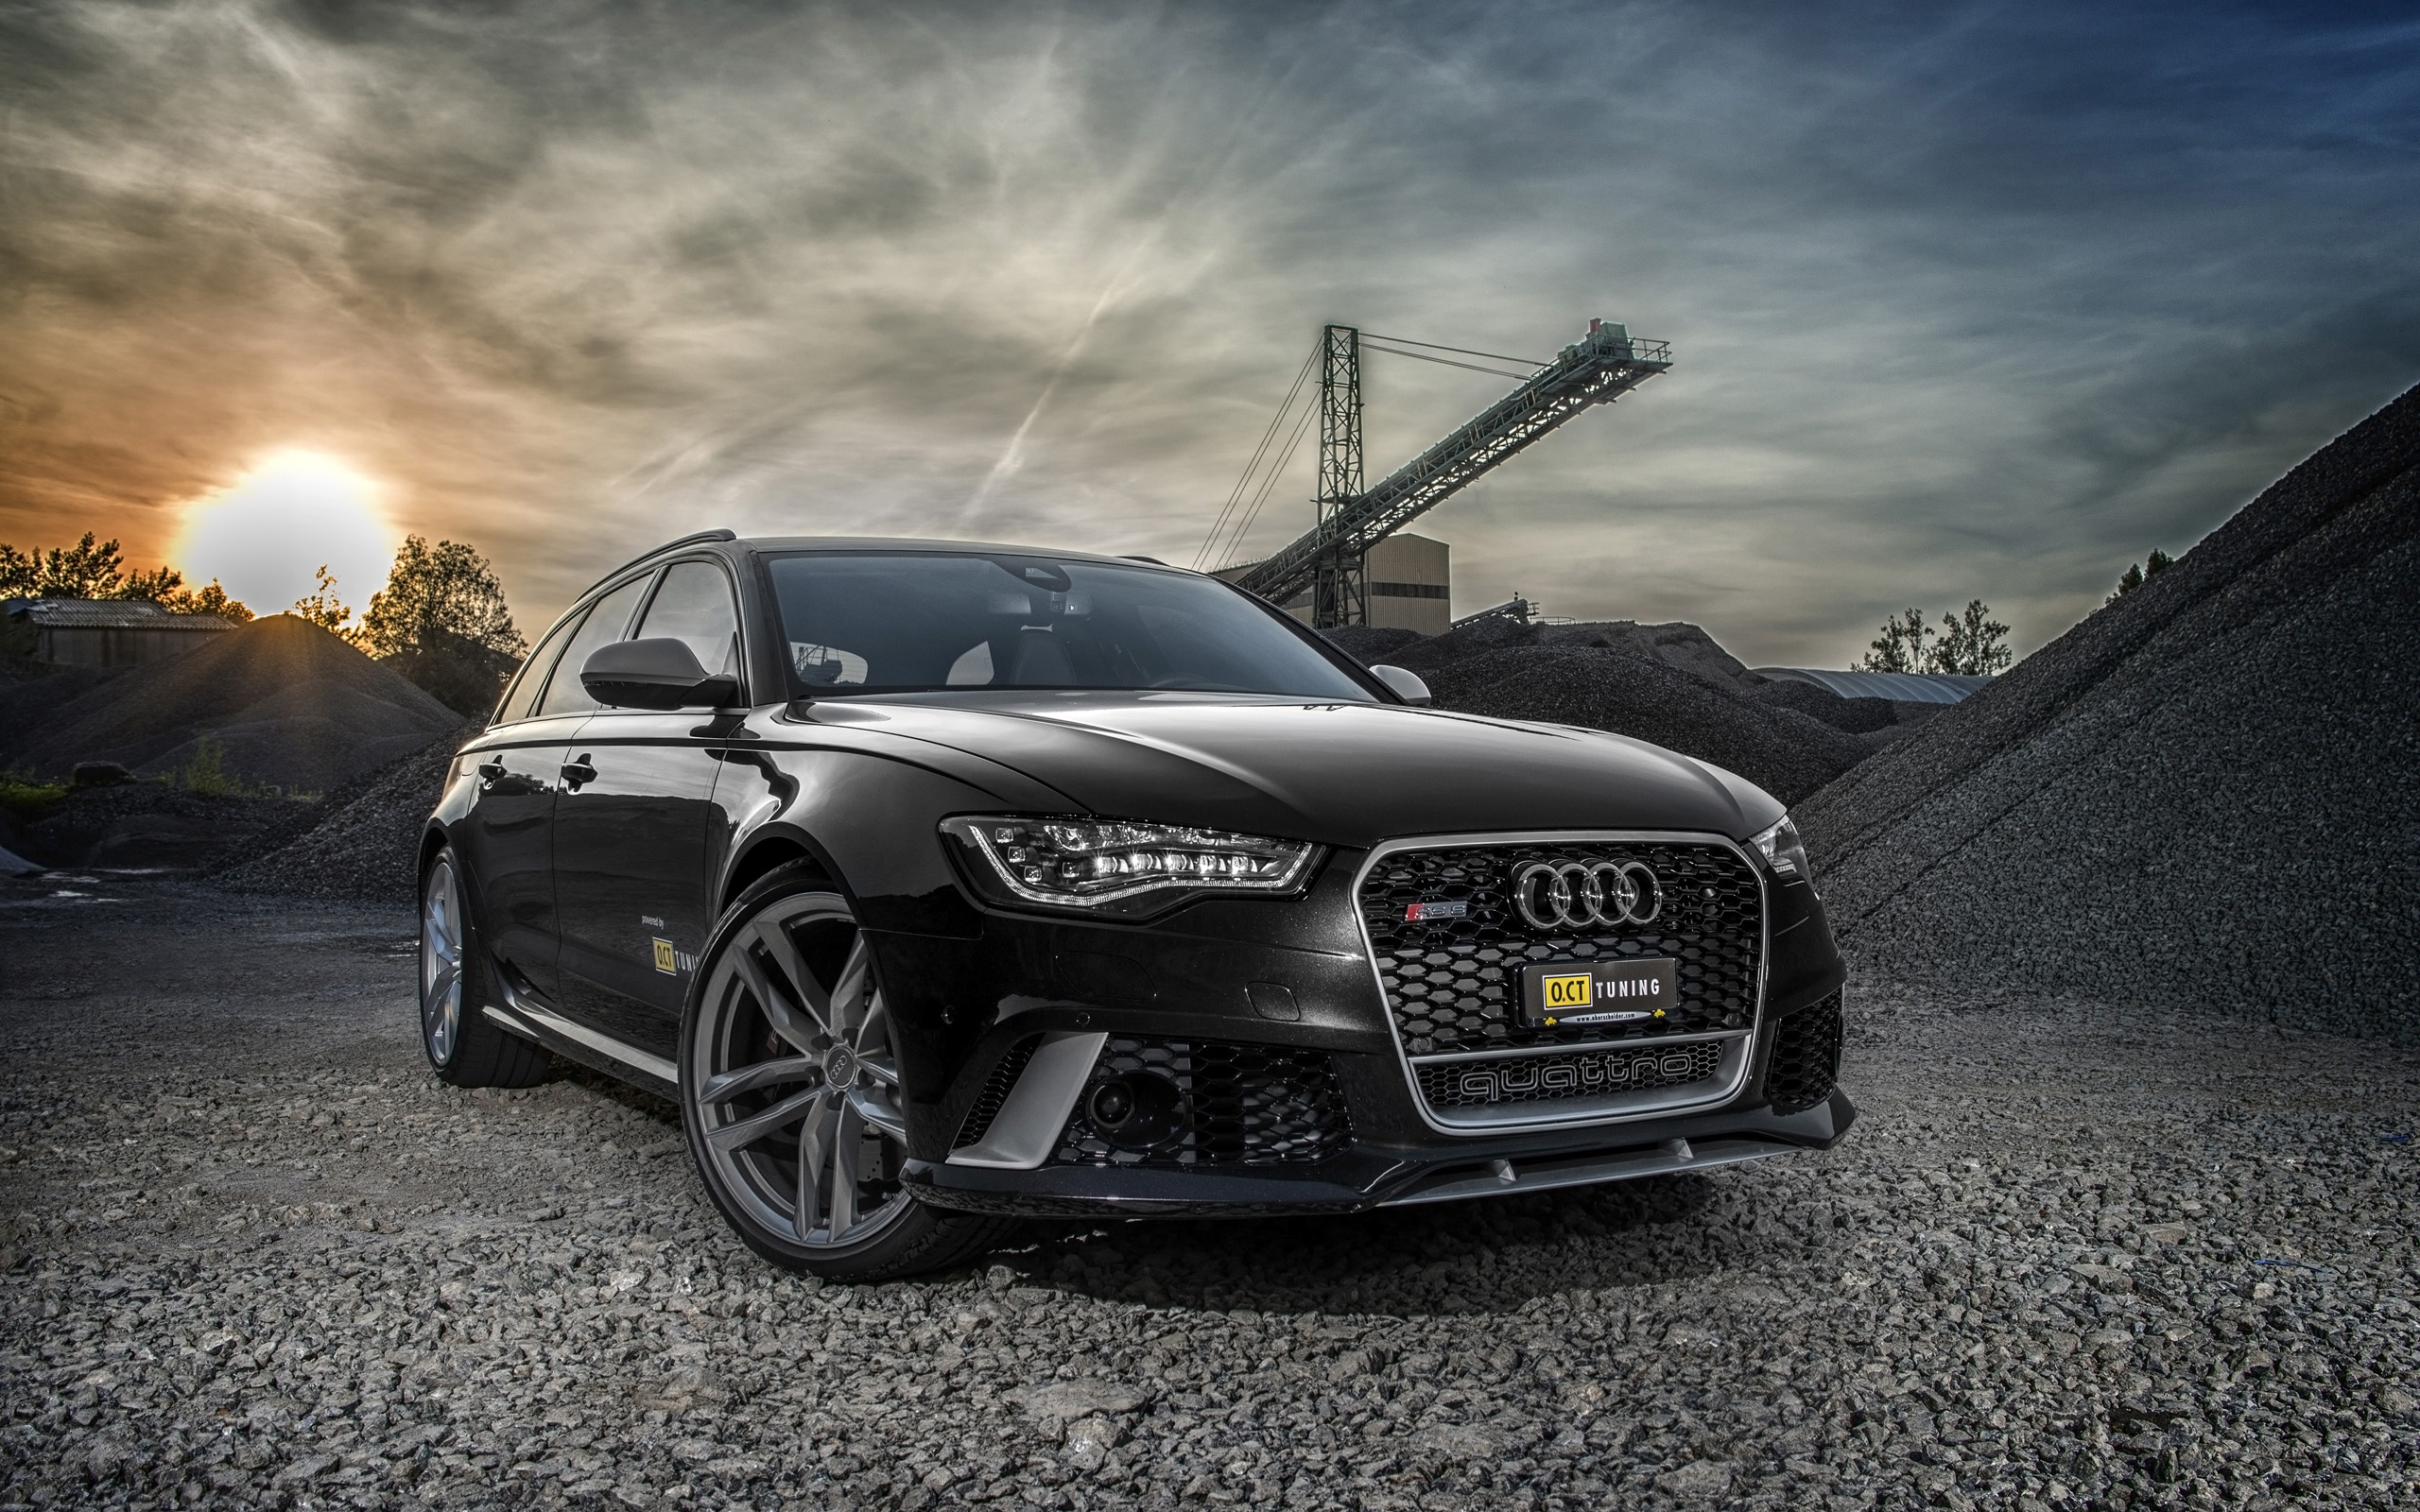 O Ct Tuning Audi Rs6related Car Wallpapers Wallpaper Cars Wallpaper Better